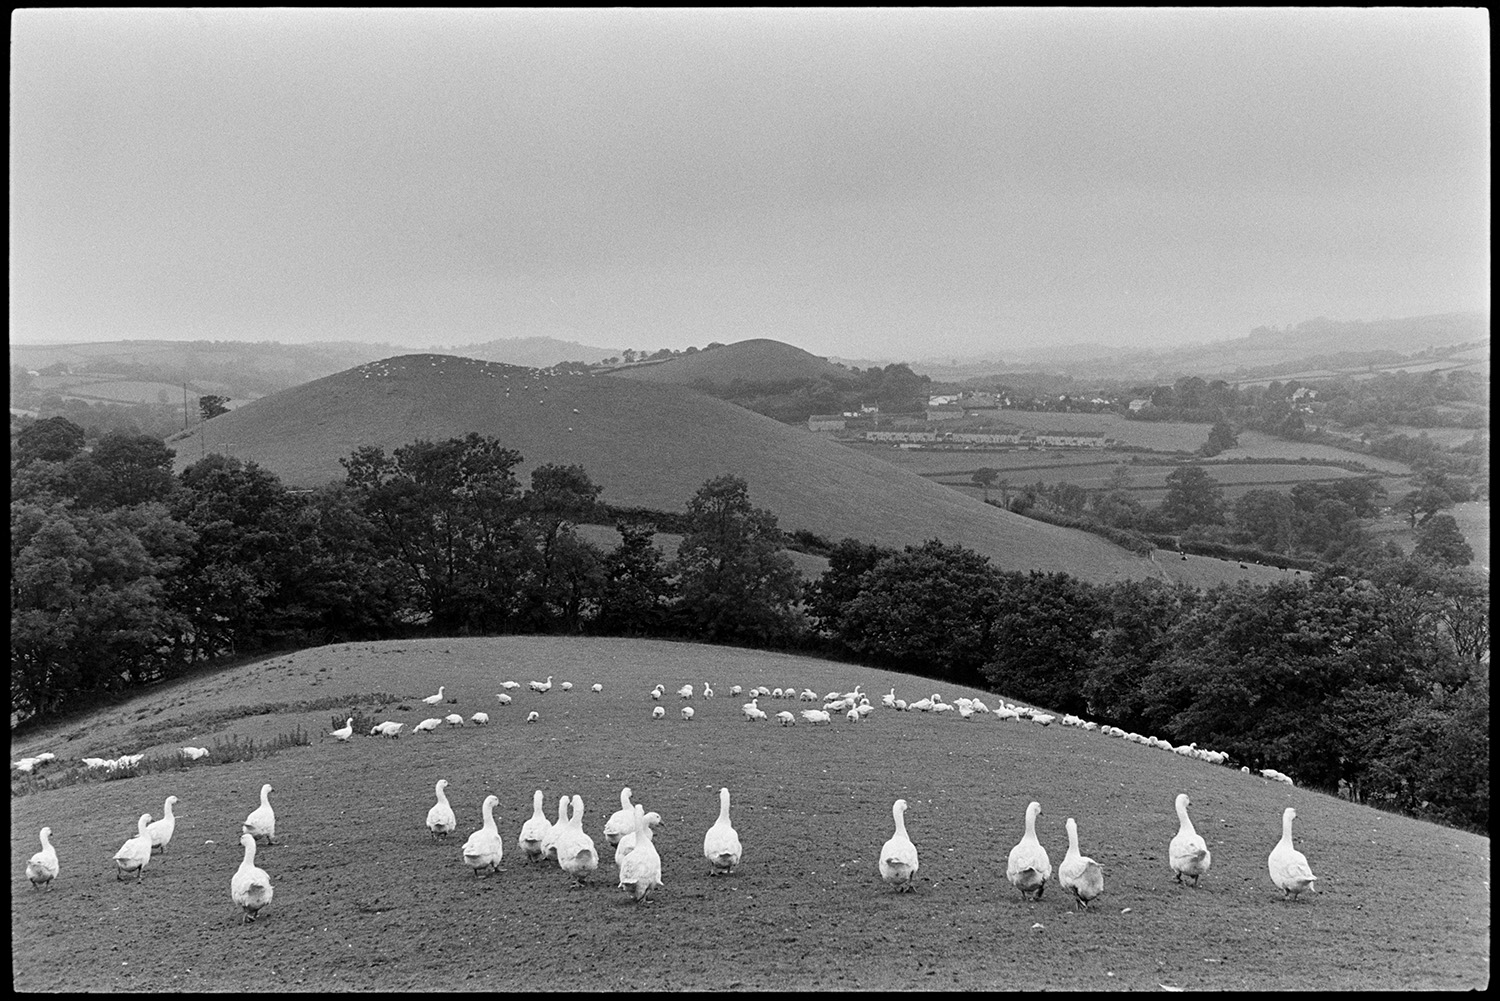 Large flock of geese, hillside. 
[A large flock of geese grazing in a field at Indiwell, Swimbridge. Trees, houses and a hillside can be seen in the background.]